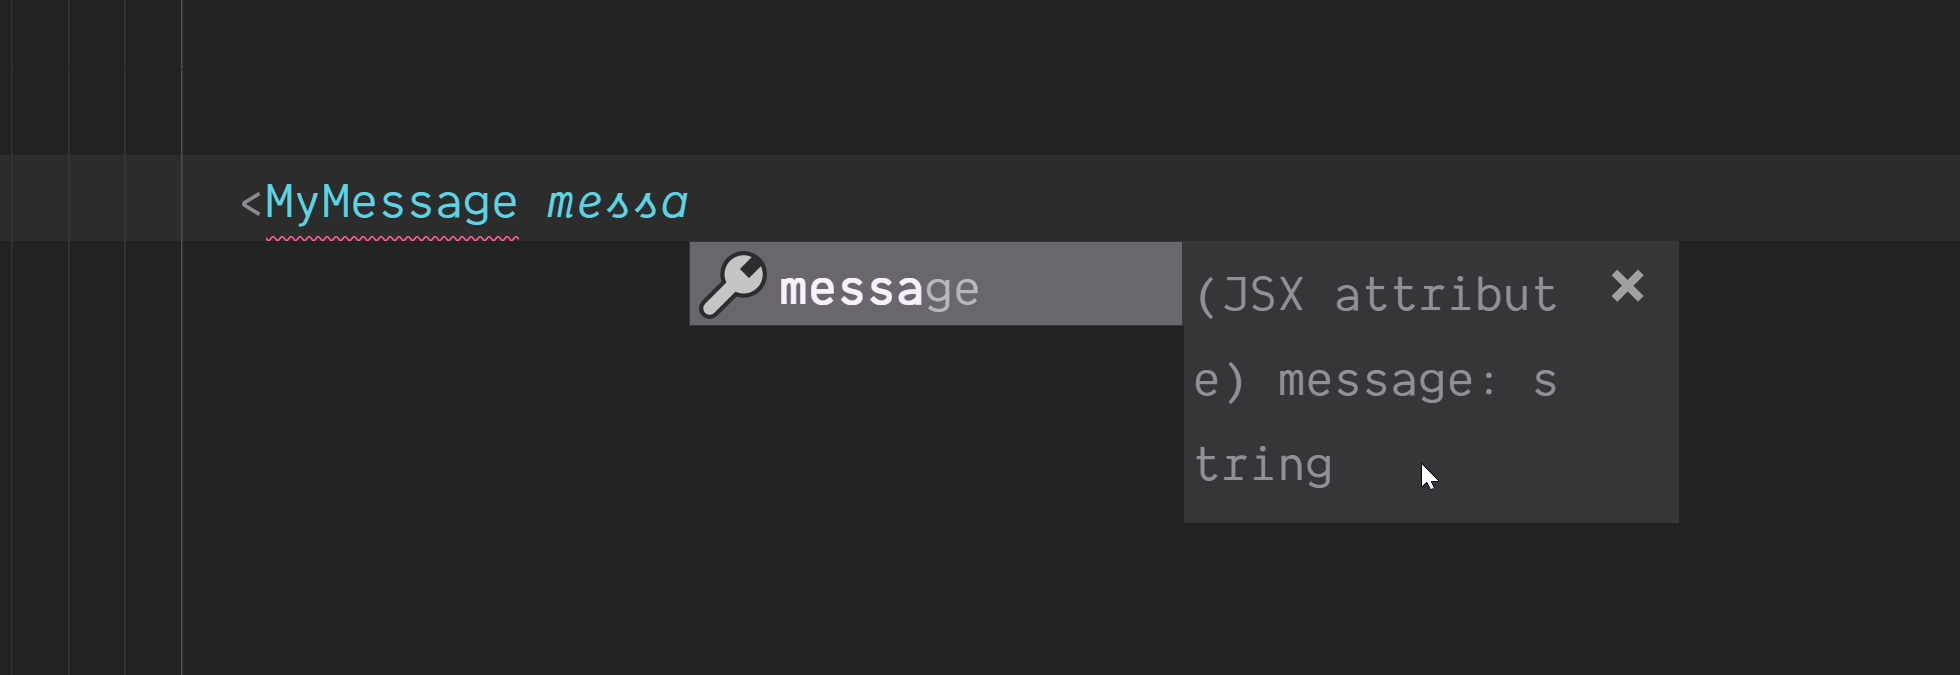 Screenshot of the expected message type.